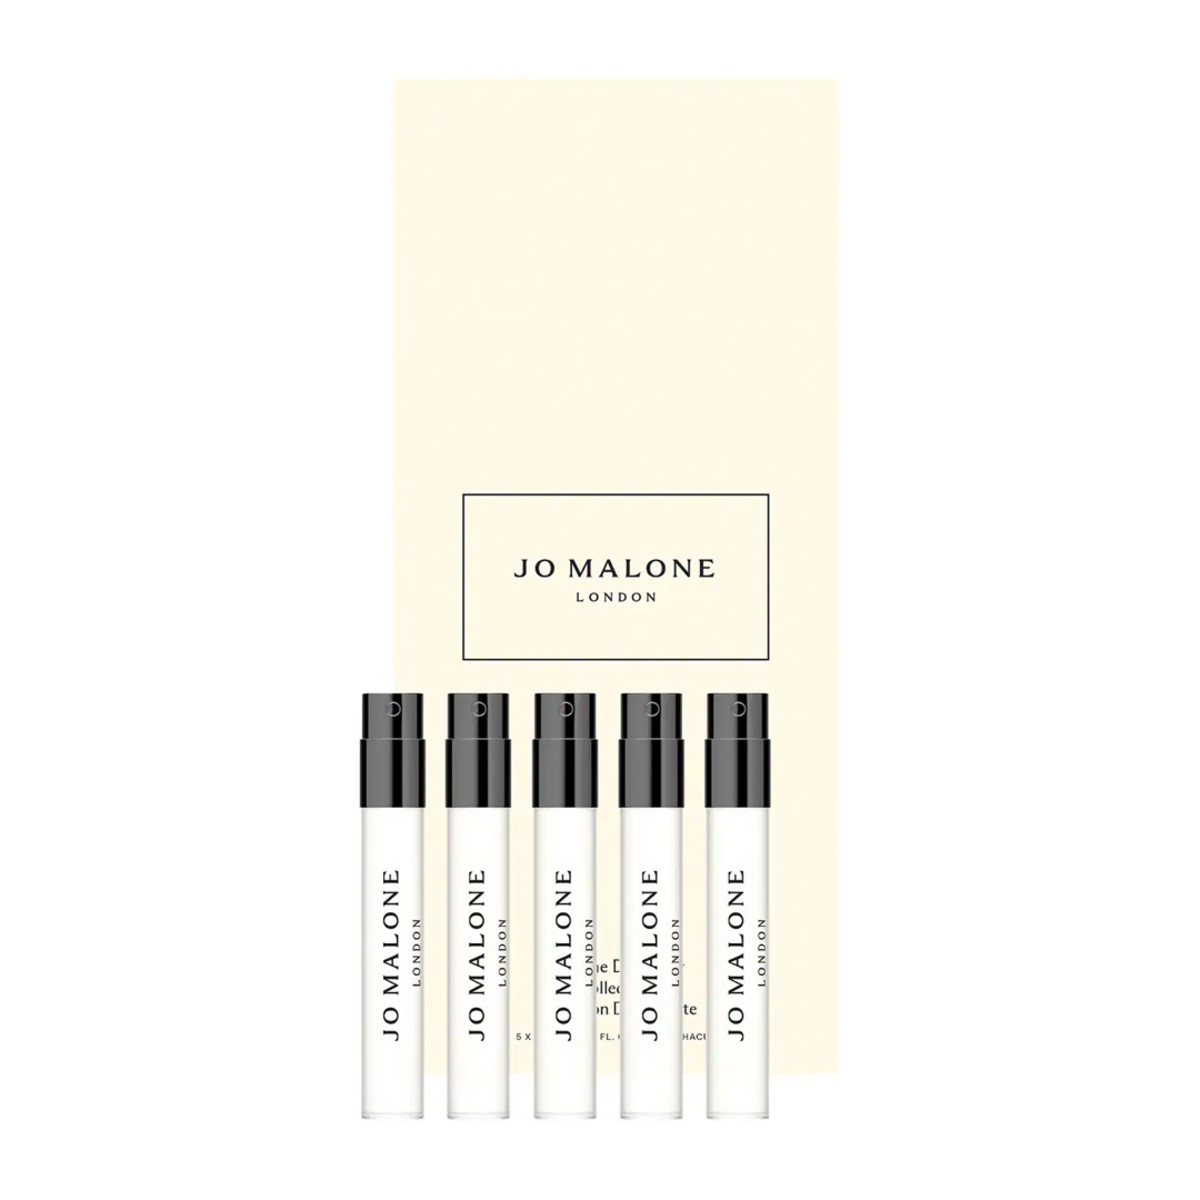 One of the best perfume gift sets for women who love all things beauty, the Jo Malone London Cologne Discovery Set available now at Sephora